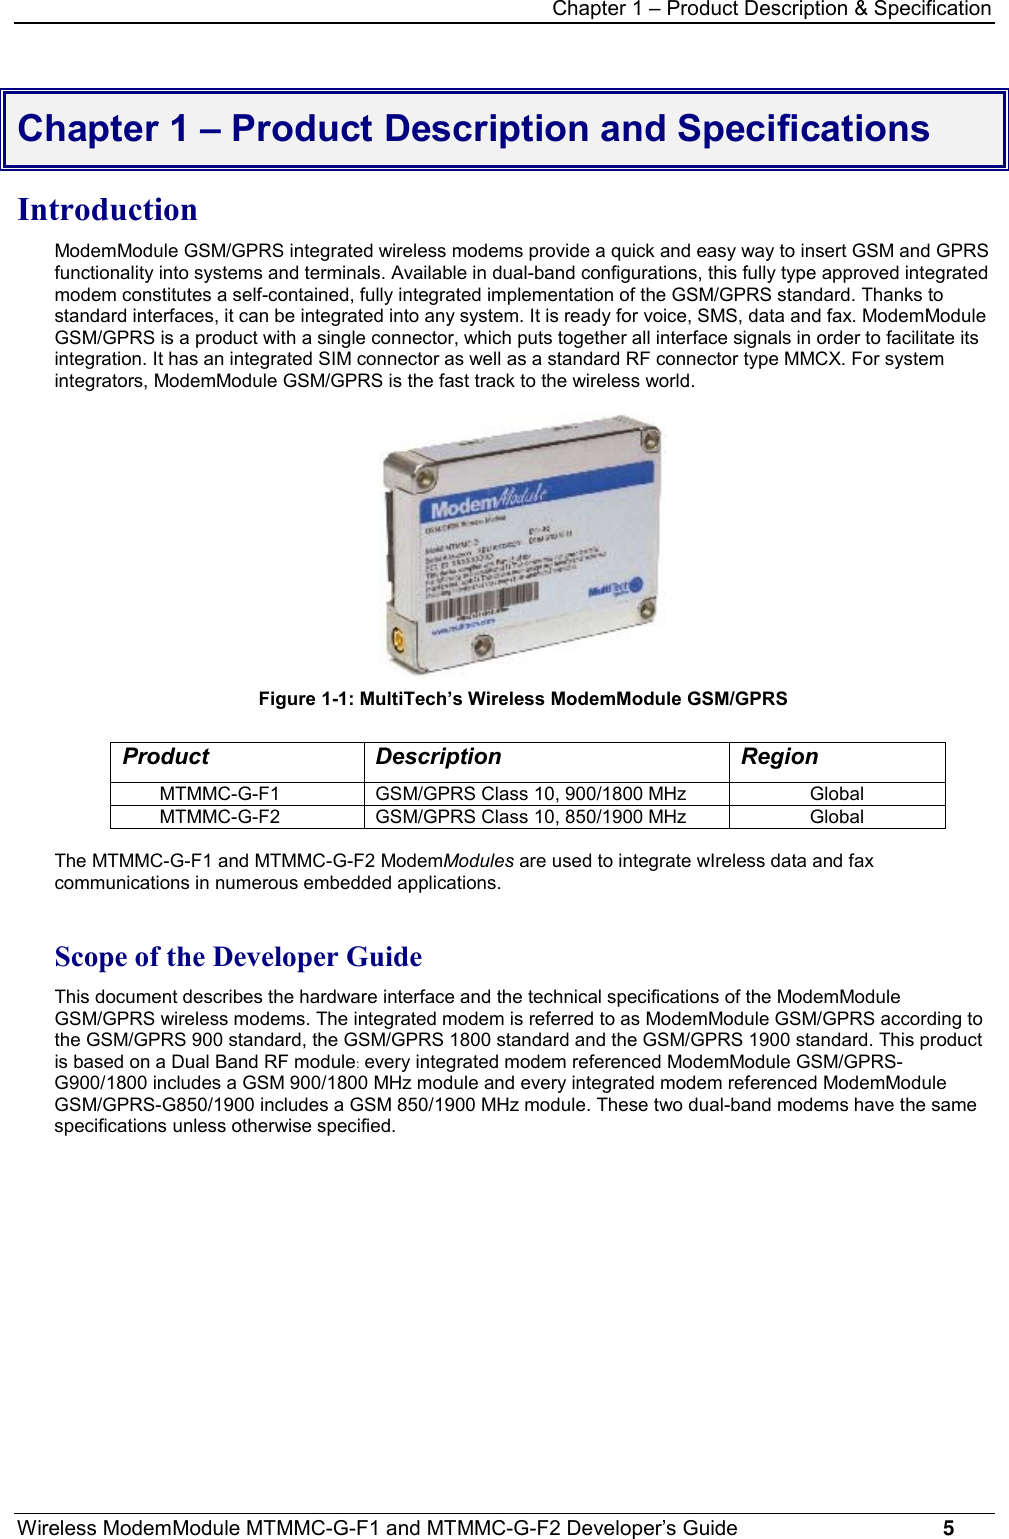 Chapter 1 – Product Description &amp; SpecificationWireless ModemModule MTMMC-G-F1 and MTMMC-G-F2 Developer’s Guide     5Chapter 1 – Product Description and SpecificationsIntroductionModemModule GSM/GPRS integrated wireless modems provide a quick and easy way to insert GSM and GPRSfunctionality into systems and terminals. Available in dual-band configurations, this fully type approved integratedmodem constitutes a self-contained, fully integrated implementation of the GSM/GPRS standard. Thanks tostandard interfaces, it can be integrated into any system. It is ready for voice, SMS, data and fax. ModemModuleGSM/GPRS is a product with a single connector, which puts together all interface signals in order to facilitate itsintegration. It has an integrated SIM connector as well as a standard RF connector type MMCX. For systemintegrators, ModemModule GSM/GPRS is the fast track to the wireless world.Figure 1-1: MultiTech’s Wireless ModemModule GSM/GPRSProduct Description RegionMTMMC-G-F1 GSM/GPRS Class 10, 900/1800 MHz GlobalMTMMC-G-F2 GSM/GPRS Class 10, 850/1900 MHz GlobalThe MTMMC-G-F1 and MTMMC-G-F2 ModemModules are used to integrate wIreless data and faxcommunications in numerous embedded applications.Scope of the Developer GuideThis document describes the hardware interface and the technical specifications of the ModemModuleGSM/GPRS wireless modems. The integrated modem is referred to as ModemModule GSM/GPRS according tothe GSM/GPRS 900 standard, the GSM/GPRS 1800 standard and the GSM/GPRS 1900 standard. This productis based on a Dual Band RF module: every integrated modem referenced ModemModule GSM/GPRS-G900/1800 includes a GSM 900/1800 MHz module and every integrated modem referenced ModemModuleGSM/GPRS-G850/1900 includes a GSM 850/1900 MHz module. These two dual-band modems have the samespecifications unless otherwise specified.